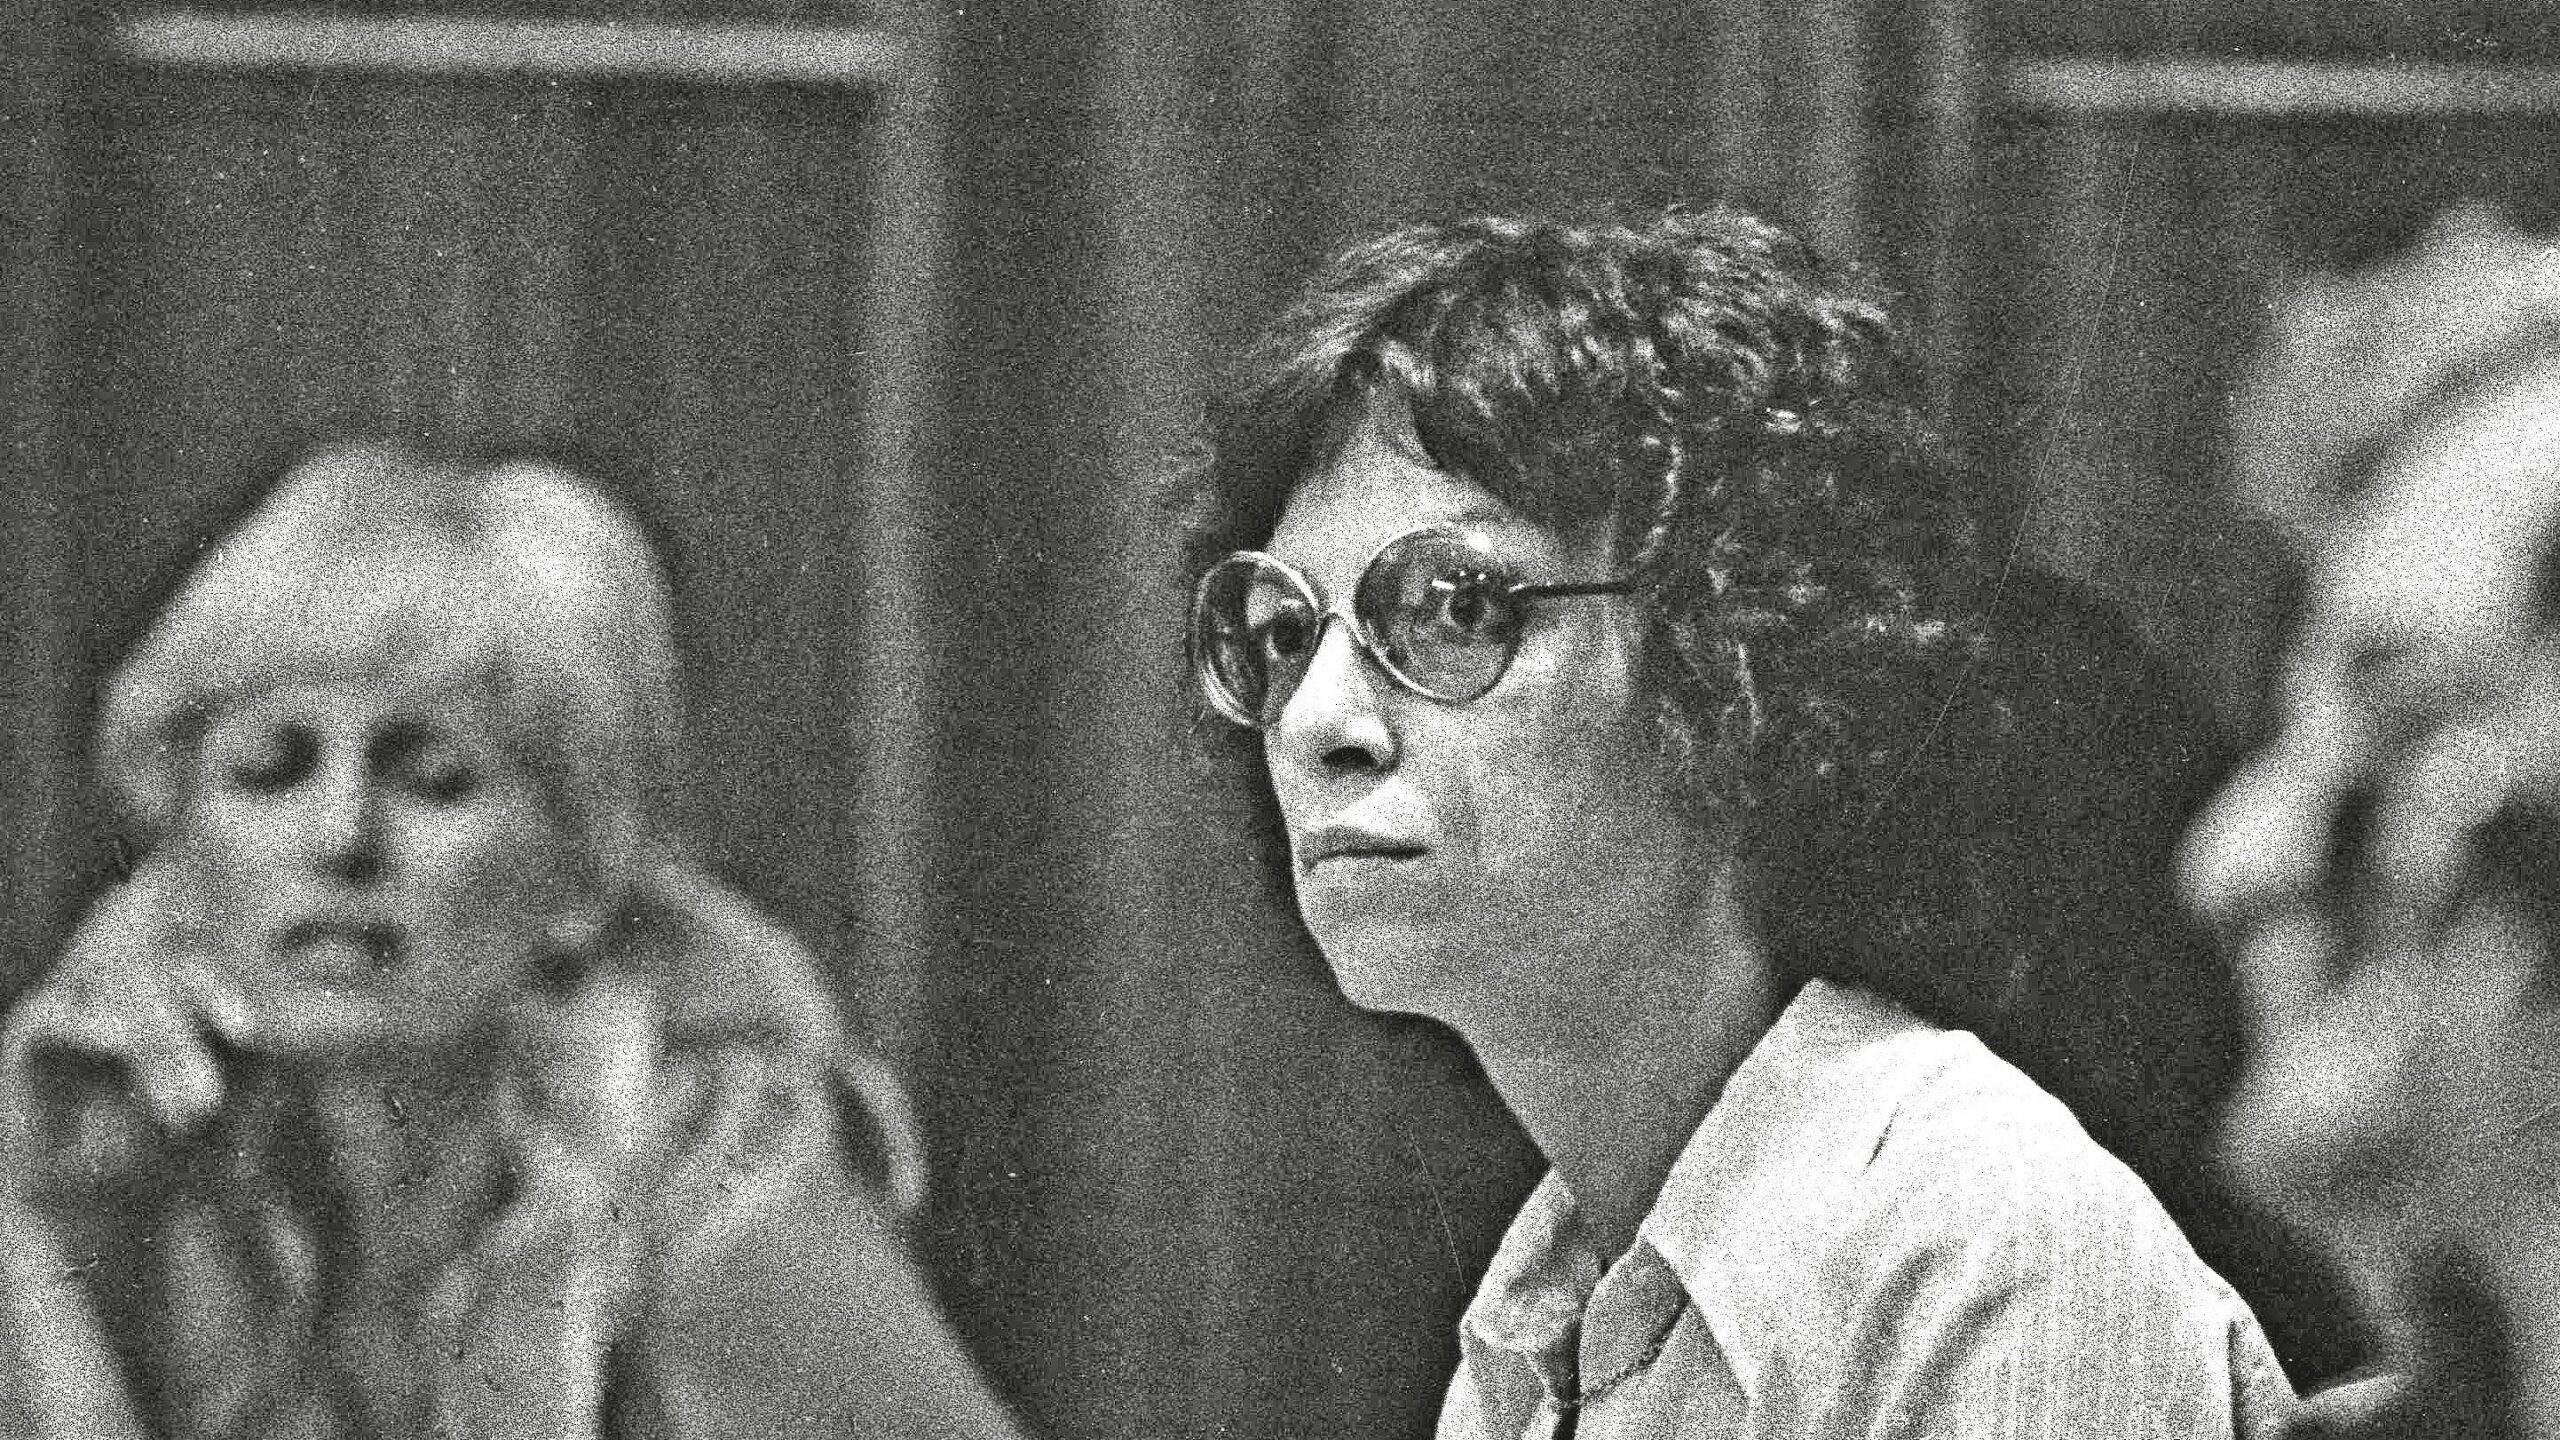 Carole Ann Boone Ted Bundy's Wife, Where Is She Now